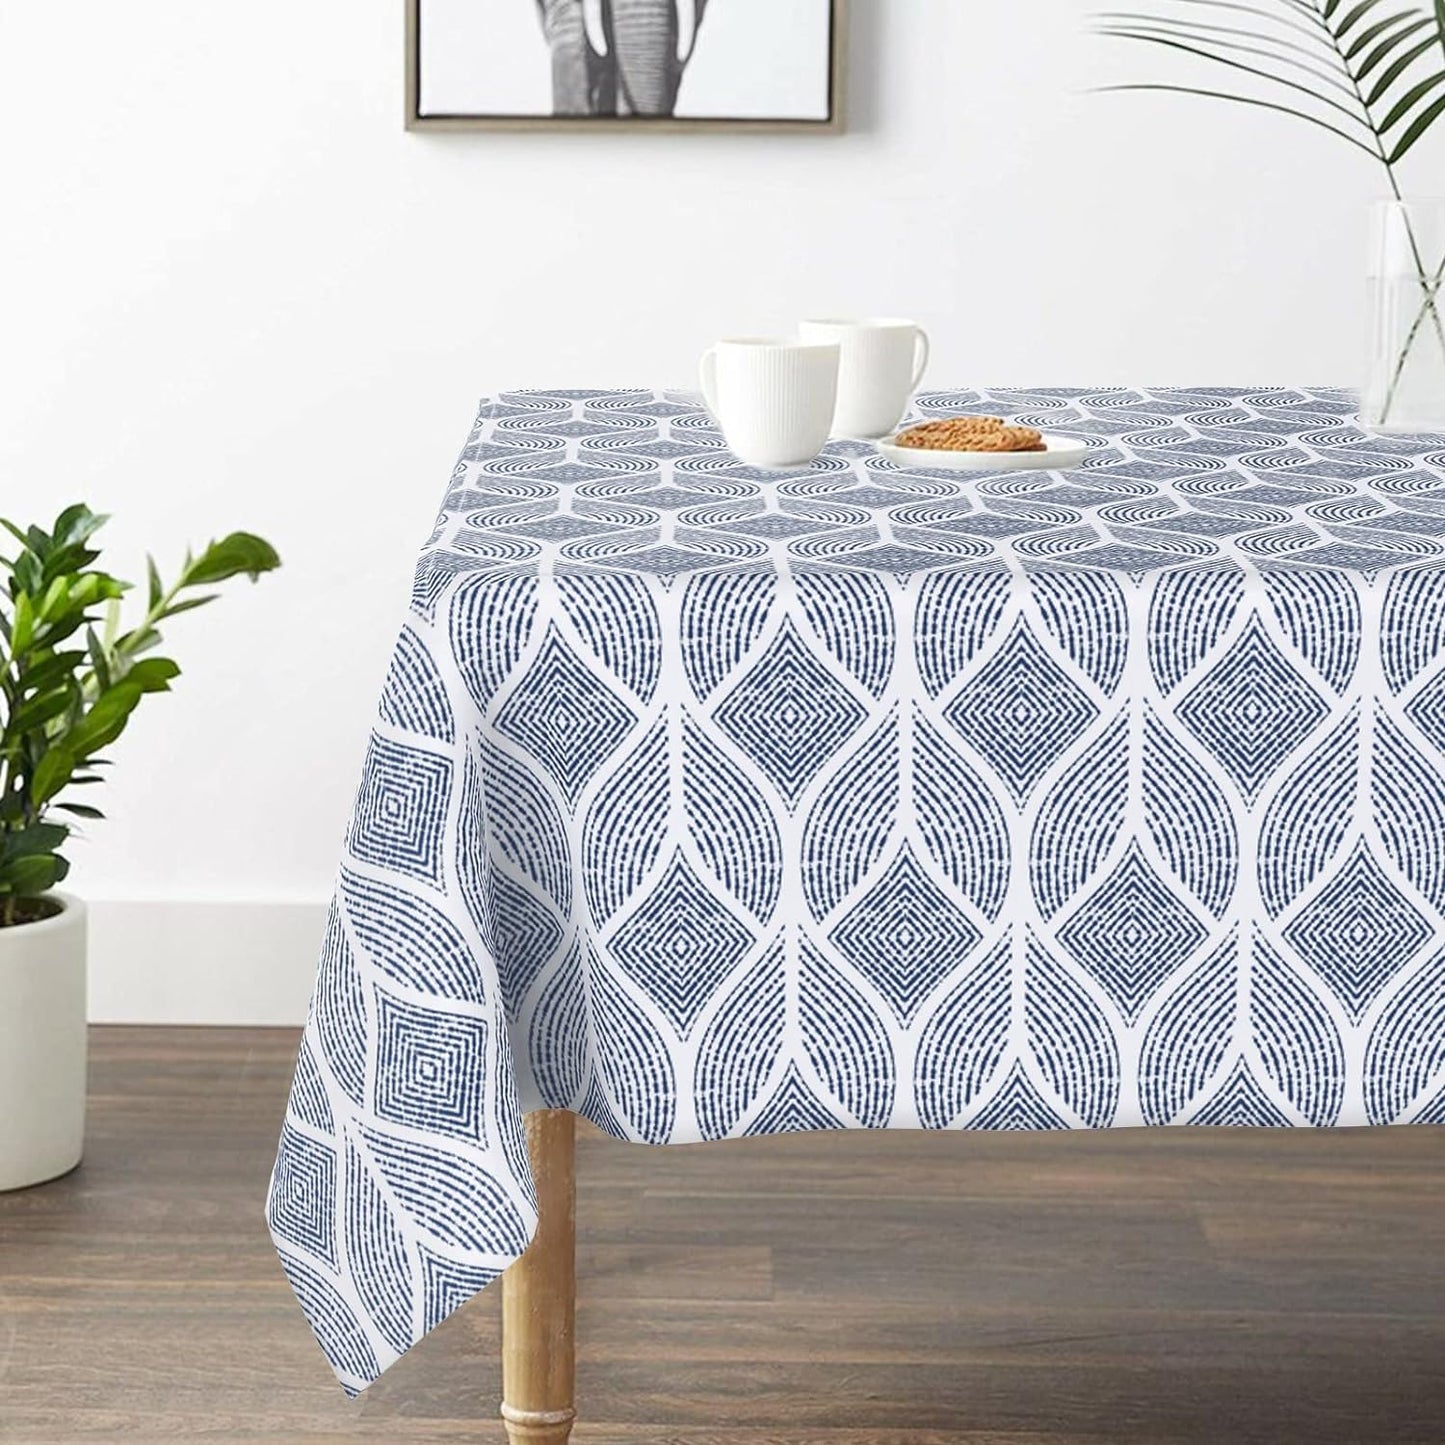 Geometric Moroccan Tablecloth Square 70 x 70 Inch, Vinyl Coated Polyester Fabric Table Cloth,Gray Blue Waterproof Oil-Proof Wipeable Table Cover for Square Kitchen Table Picnic Indoor & Outdoor Dining